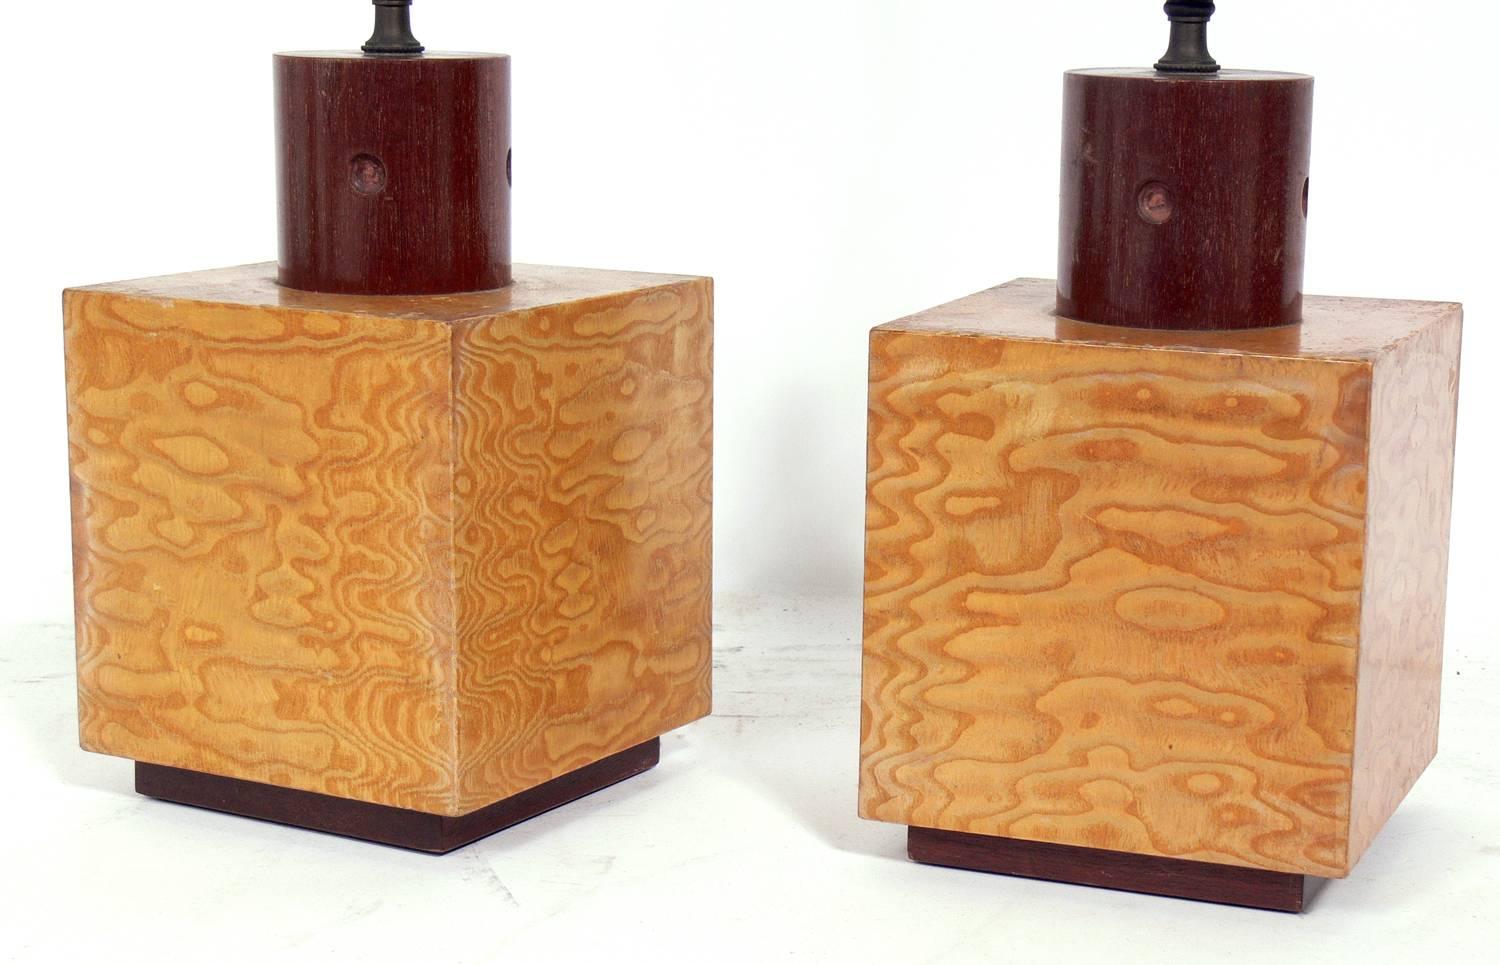 Pair of burl wood cube lamps, handmade by Andrew Szoeke, American, circa 1950s. Signed with original Andrew Szoeke brass medallion. They have been rewired and are ready to use.